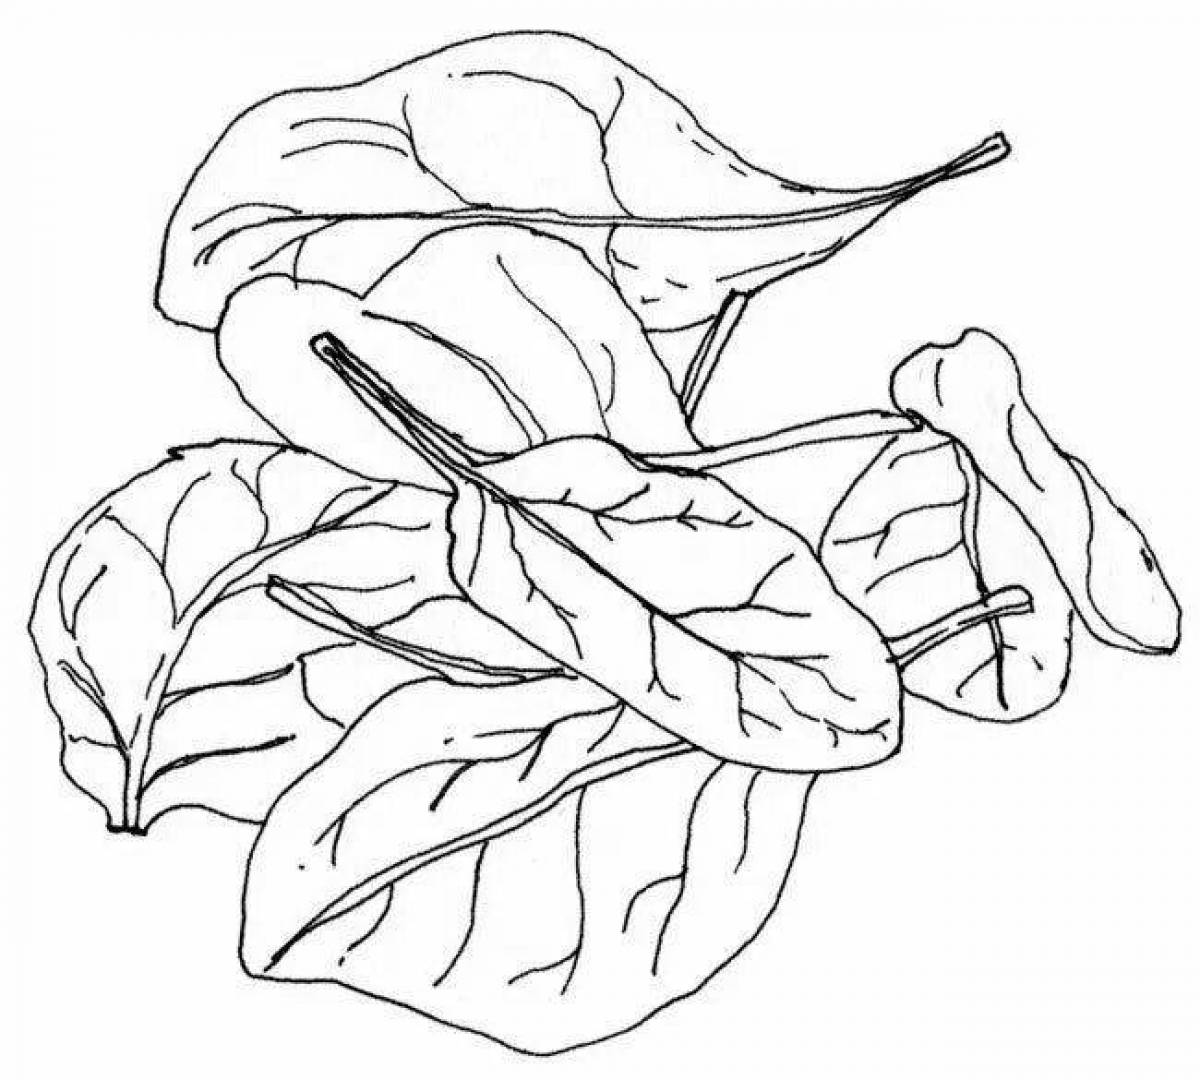 Exquisite sorrel coloring page